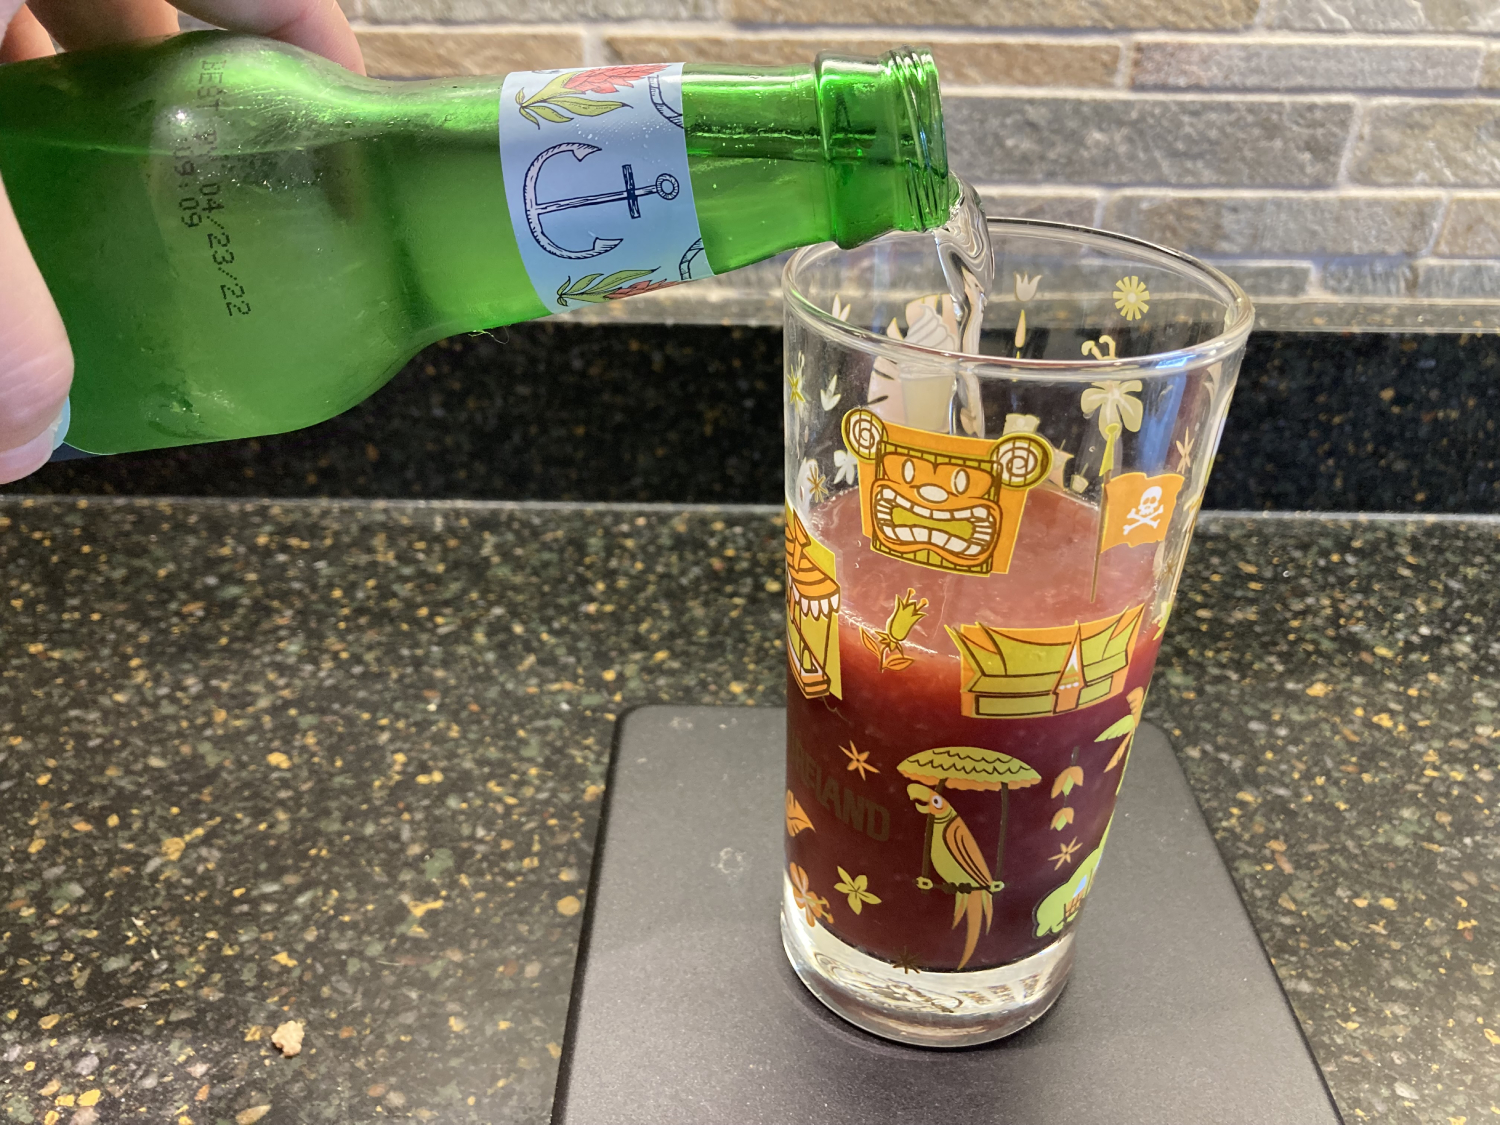 Pouring ginger ale into a glass that is half filled with mixed juices; mixed juices are a dark red color